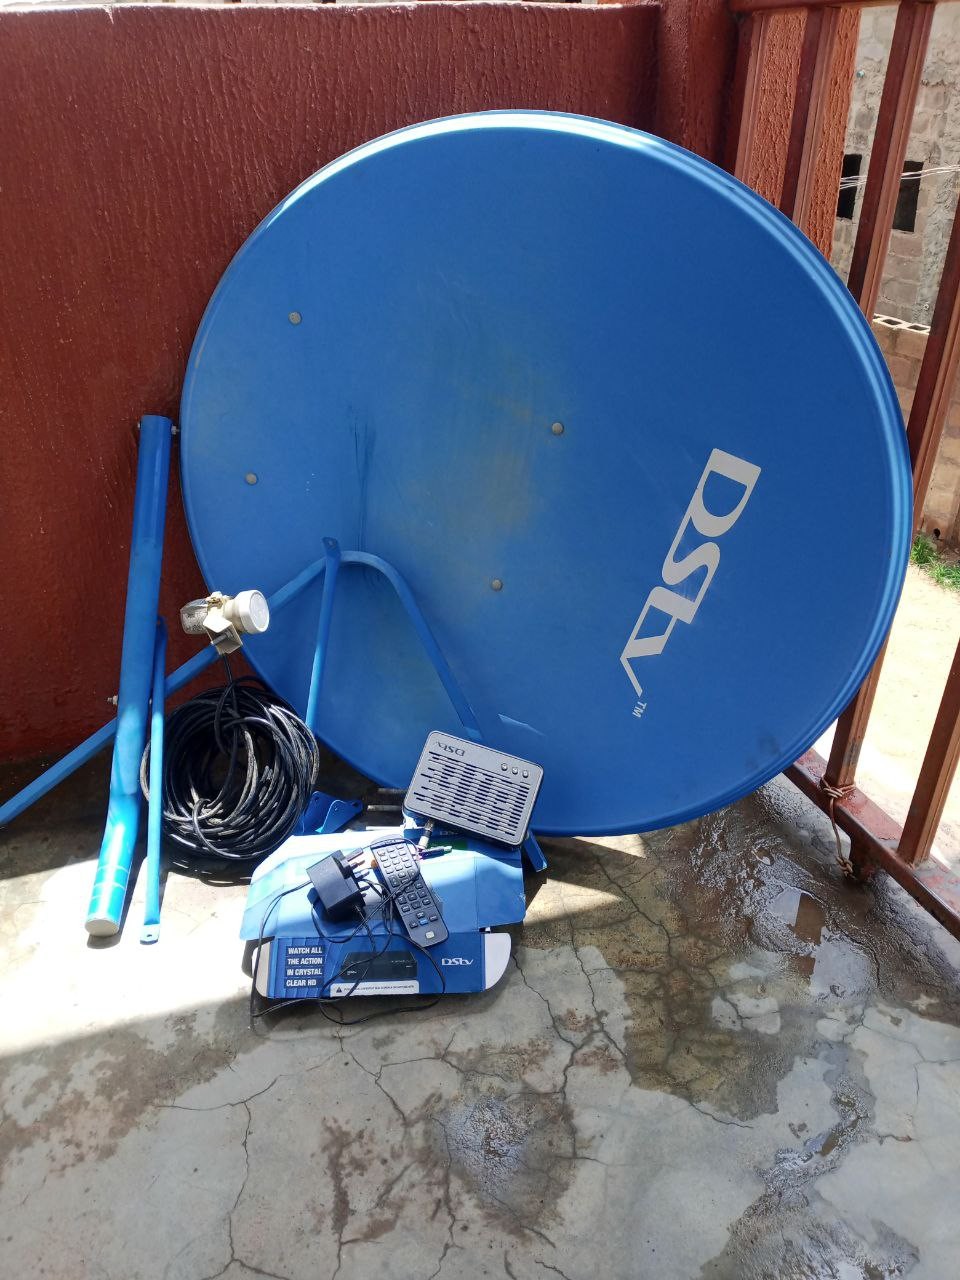 Clean Full Kit Hd DSTV Decoder - Dish Kit, Cable & Pack For-Sale